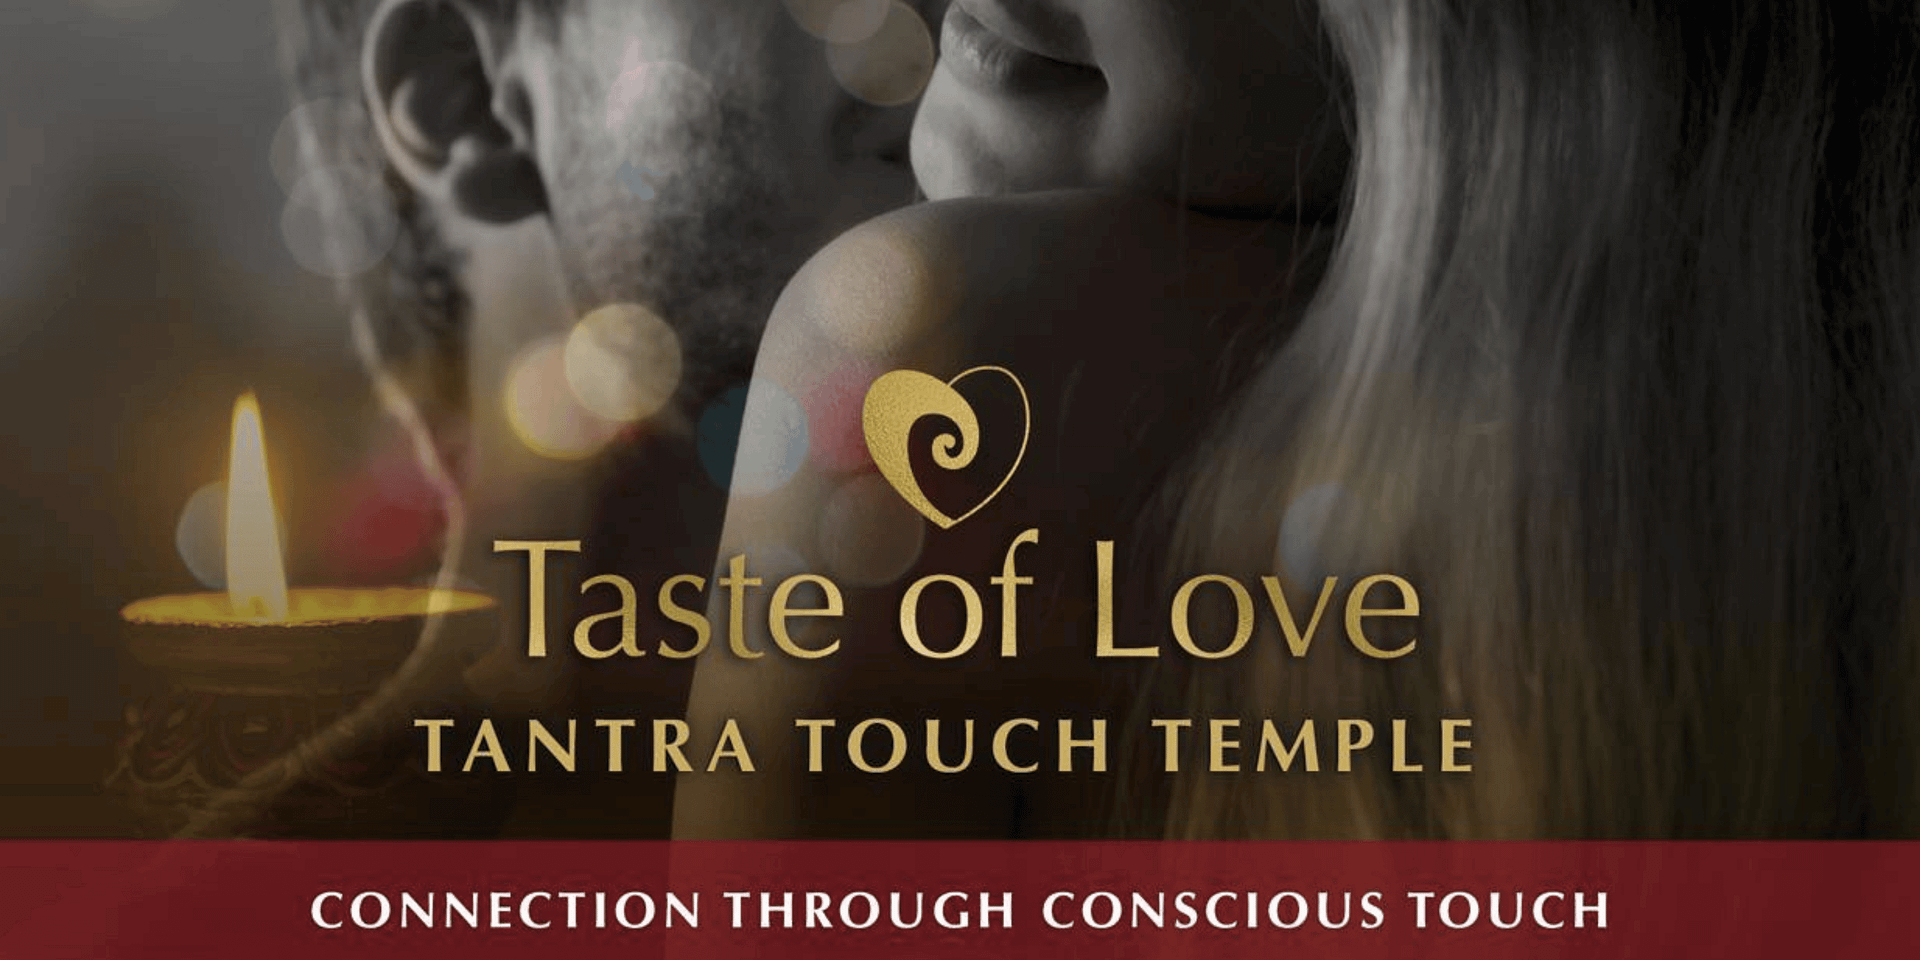 tantra touch temple event - taste of love